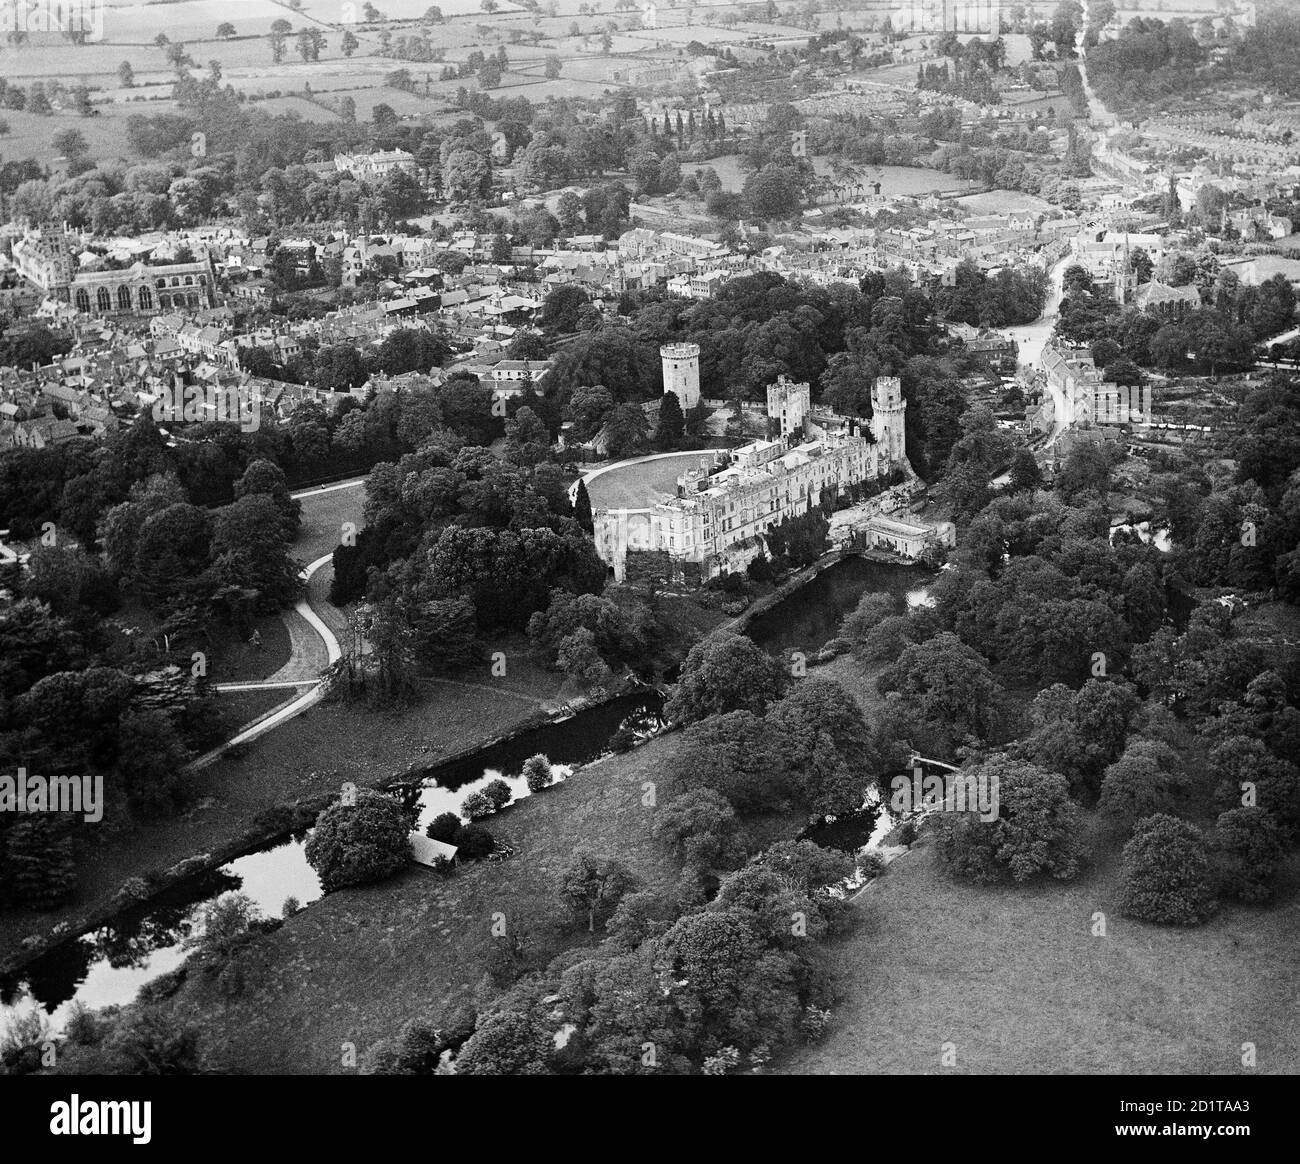 WARWICK CASTLE, Warwickshire. Aerial view of the castle and River Avon in the foreground, with the church and town beyond. Photographed in 1920. Aerofilms Collection (see Links). Stock Photo